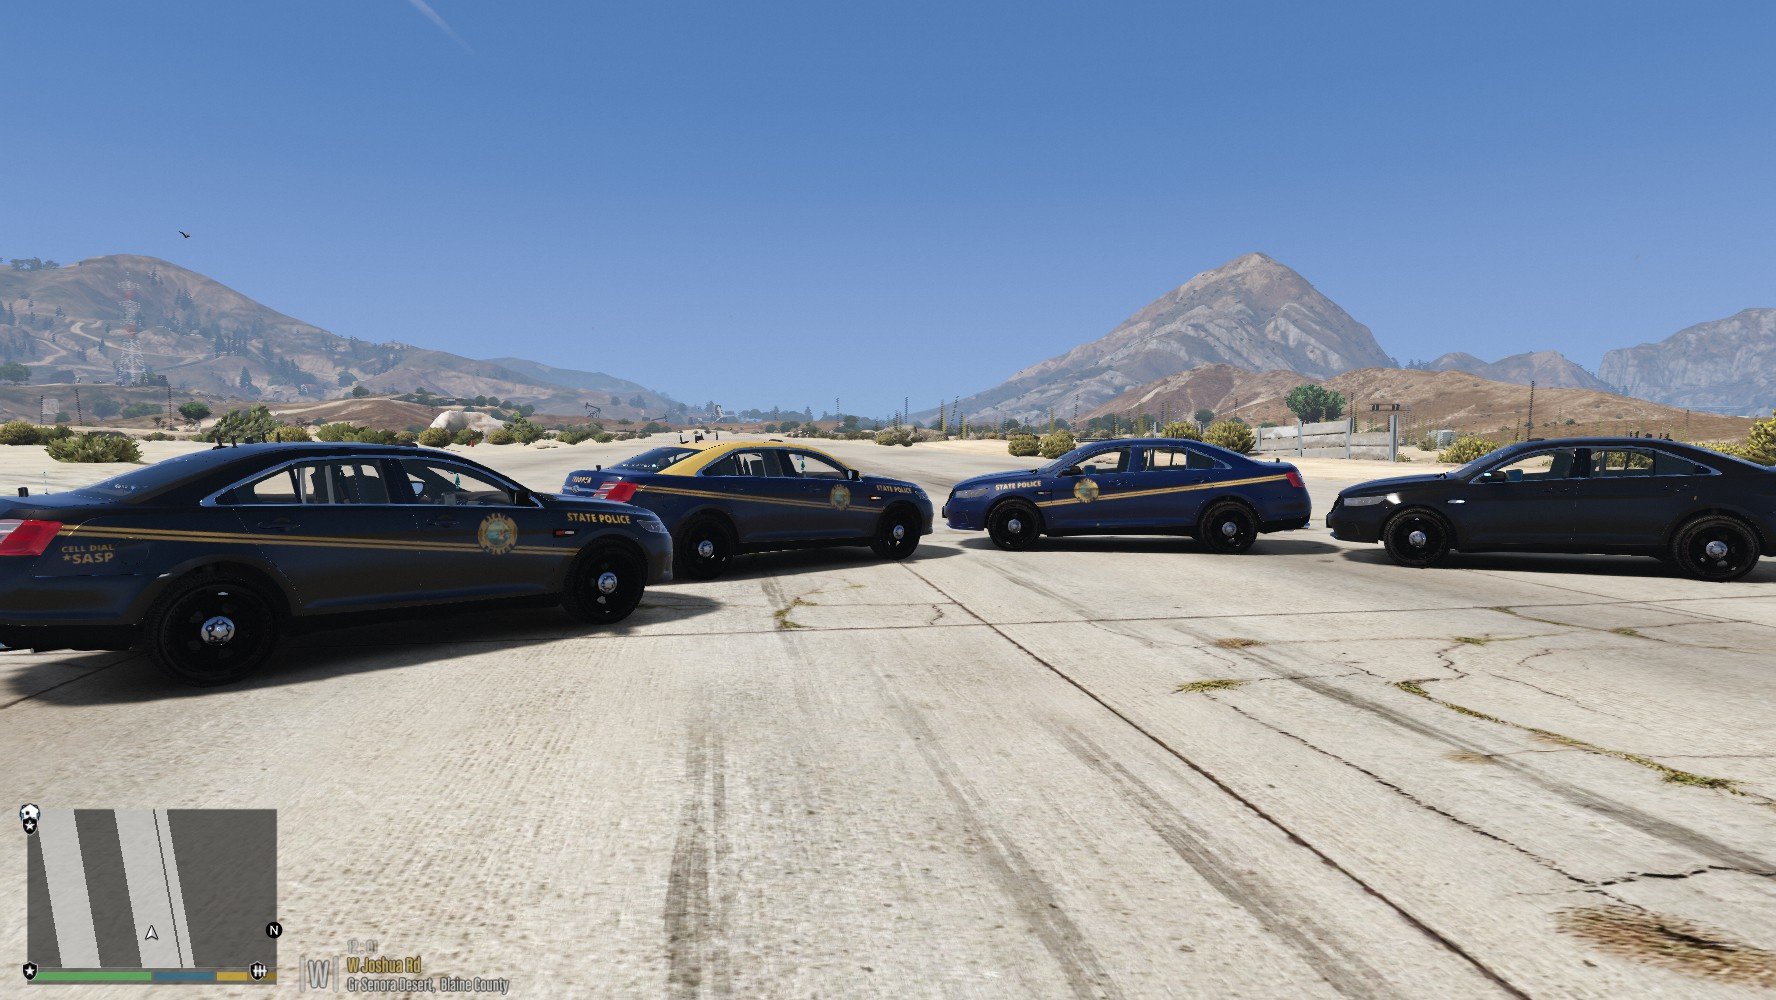 San Andreas State Police Pack (West Virginia State Police Based) - GTA5 ...